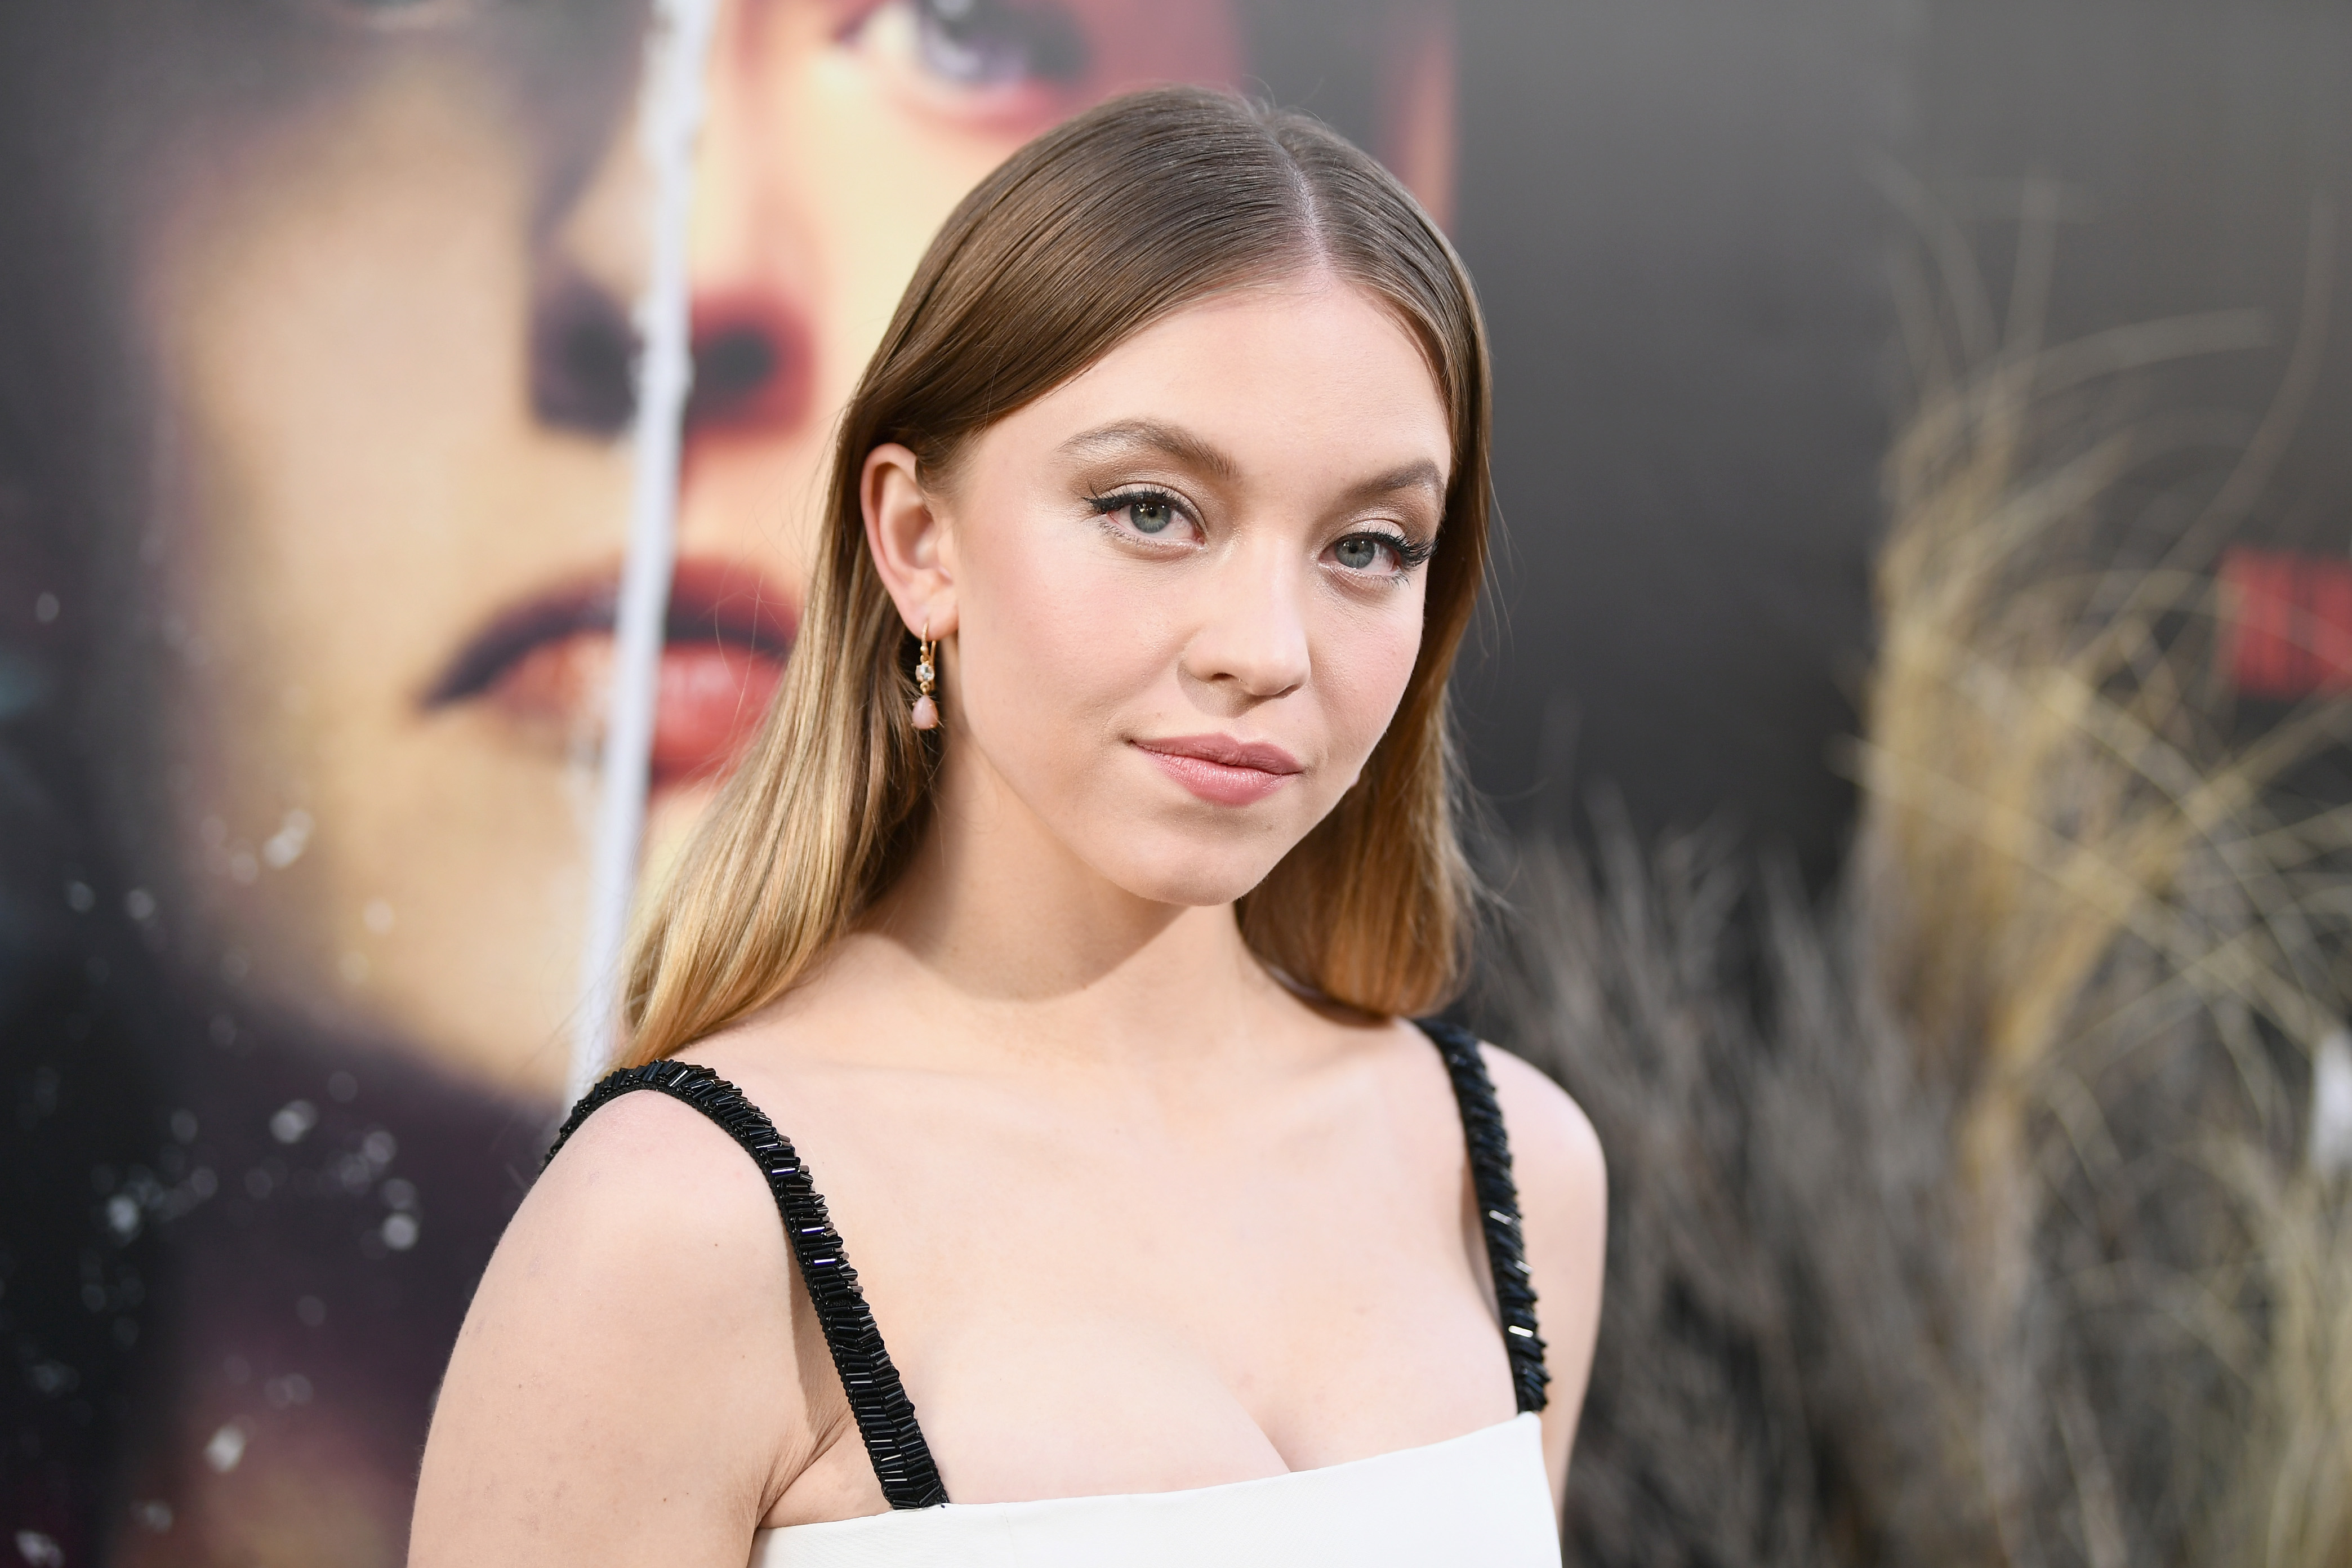 Sydney Sweeney attends the premiere of Hulu's The Handmaid's Tale Season 2 at TCL Chinese Theatre on April 19, 2018 in Hollywood, California. Sweeney wears a dress with black straps and dangly earrings.